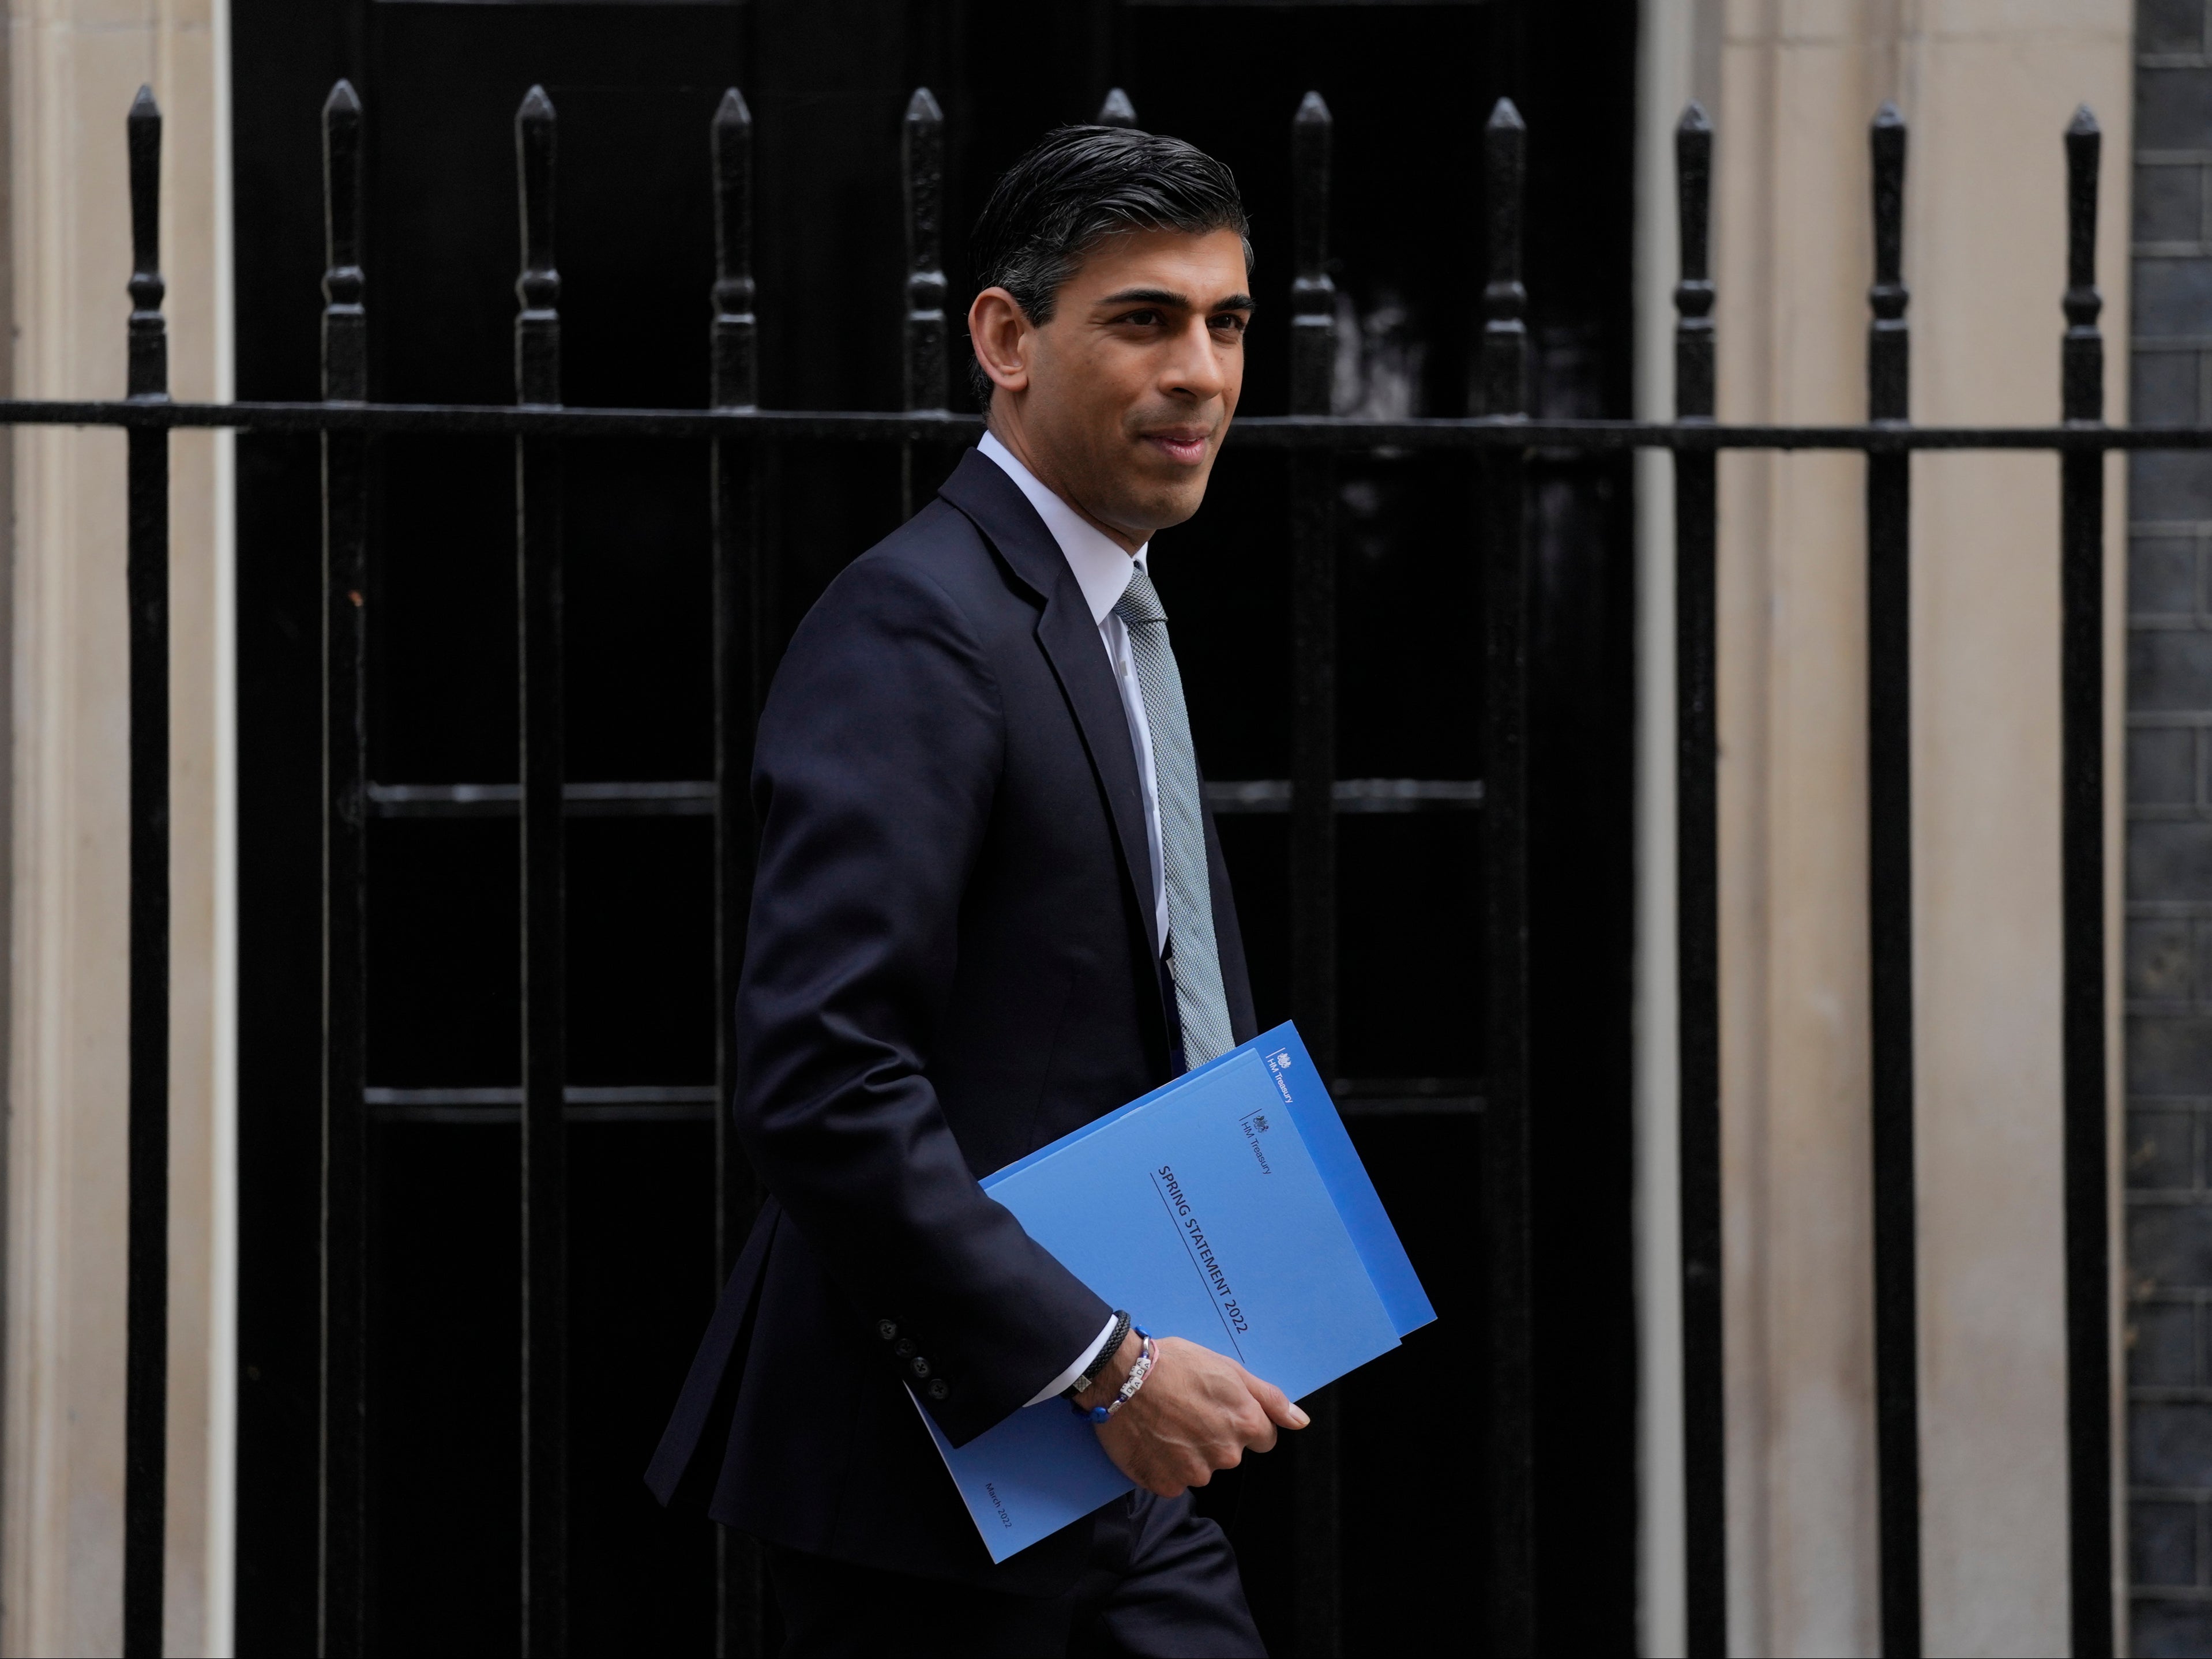 The British chancellor has faced questions over his wife’s tax status